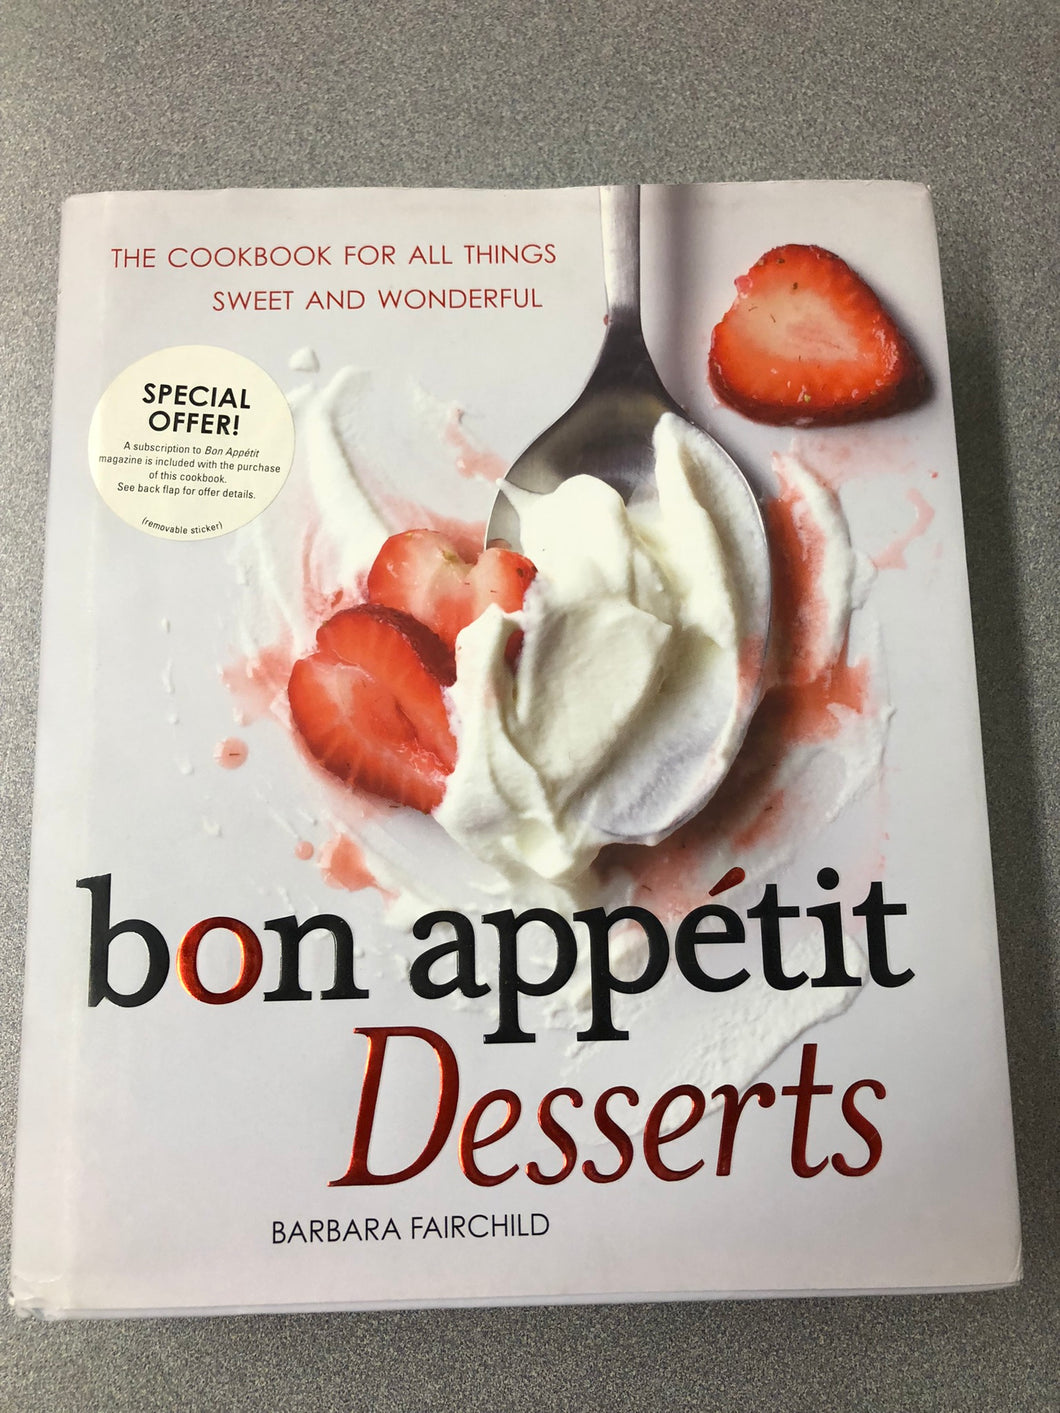 Bon Appetit Desserts: The Cookbook for All Things Sweet and Wonderful, Fairchild, Barbara  [2010] CO 9/22